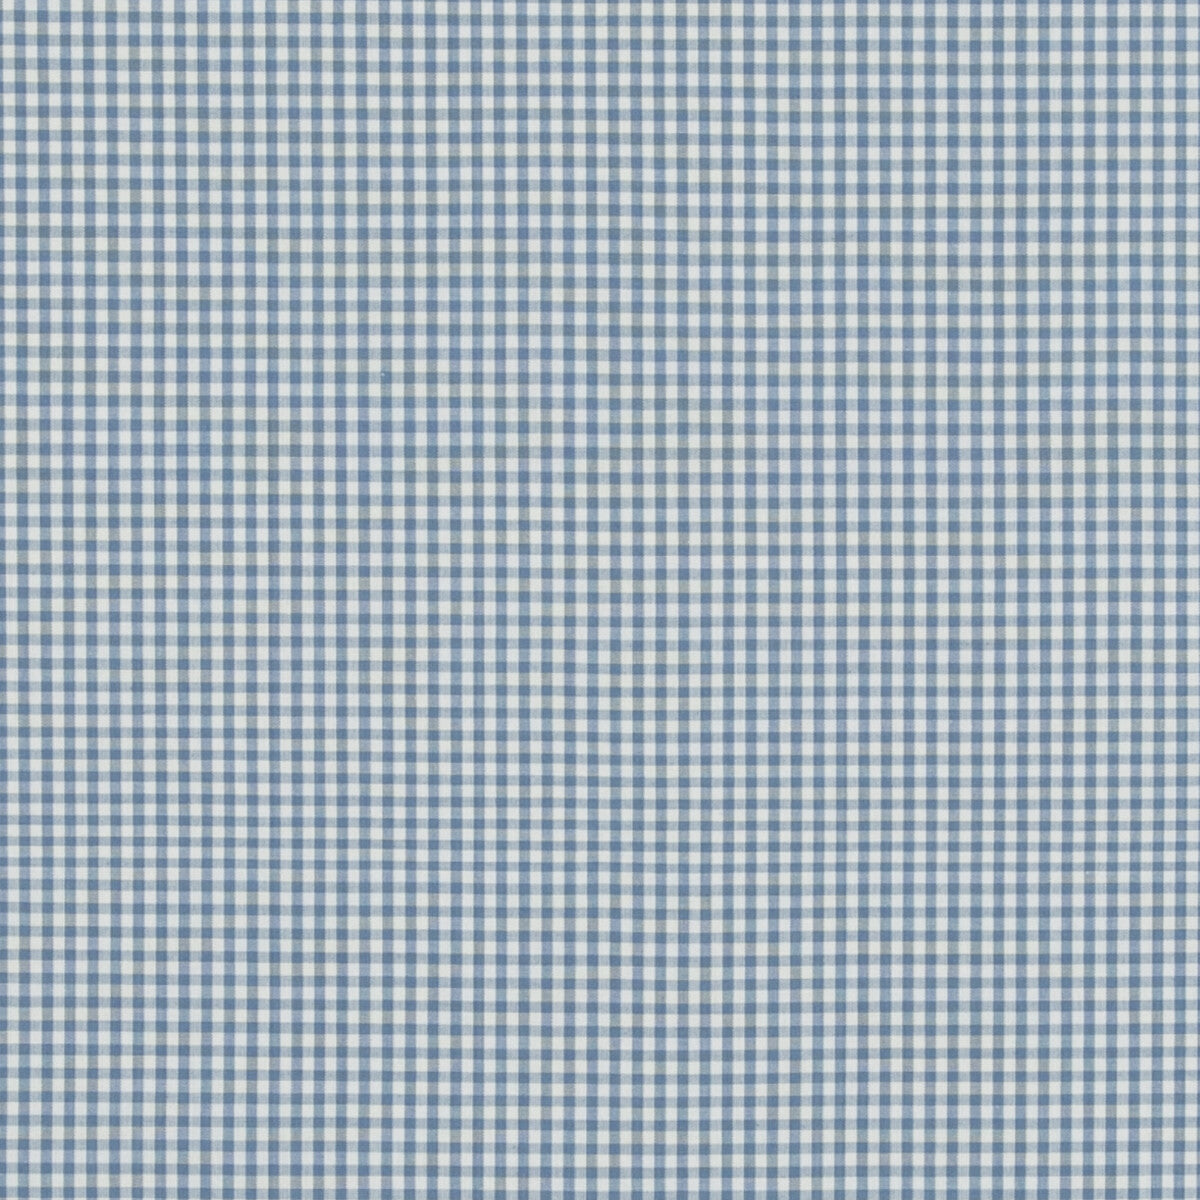 Sherborne Gingham fabric in soft blue color - pattern PF50506.605.0 - by Baker Lifestyle in the Bridport collection